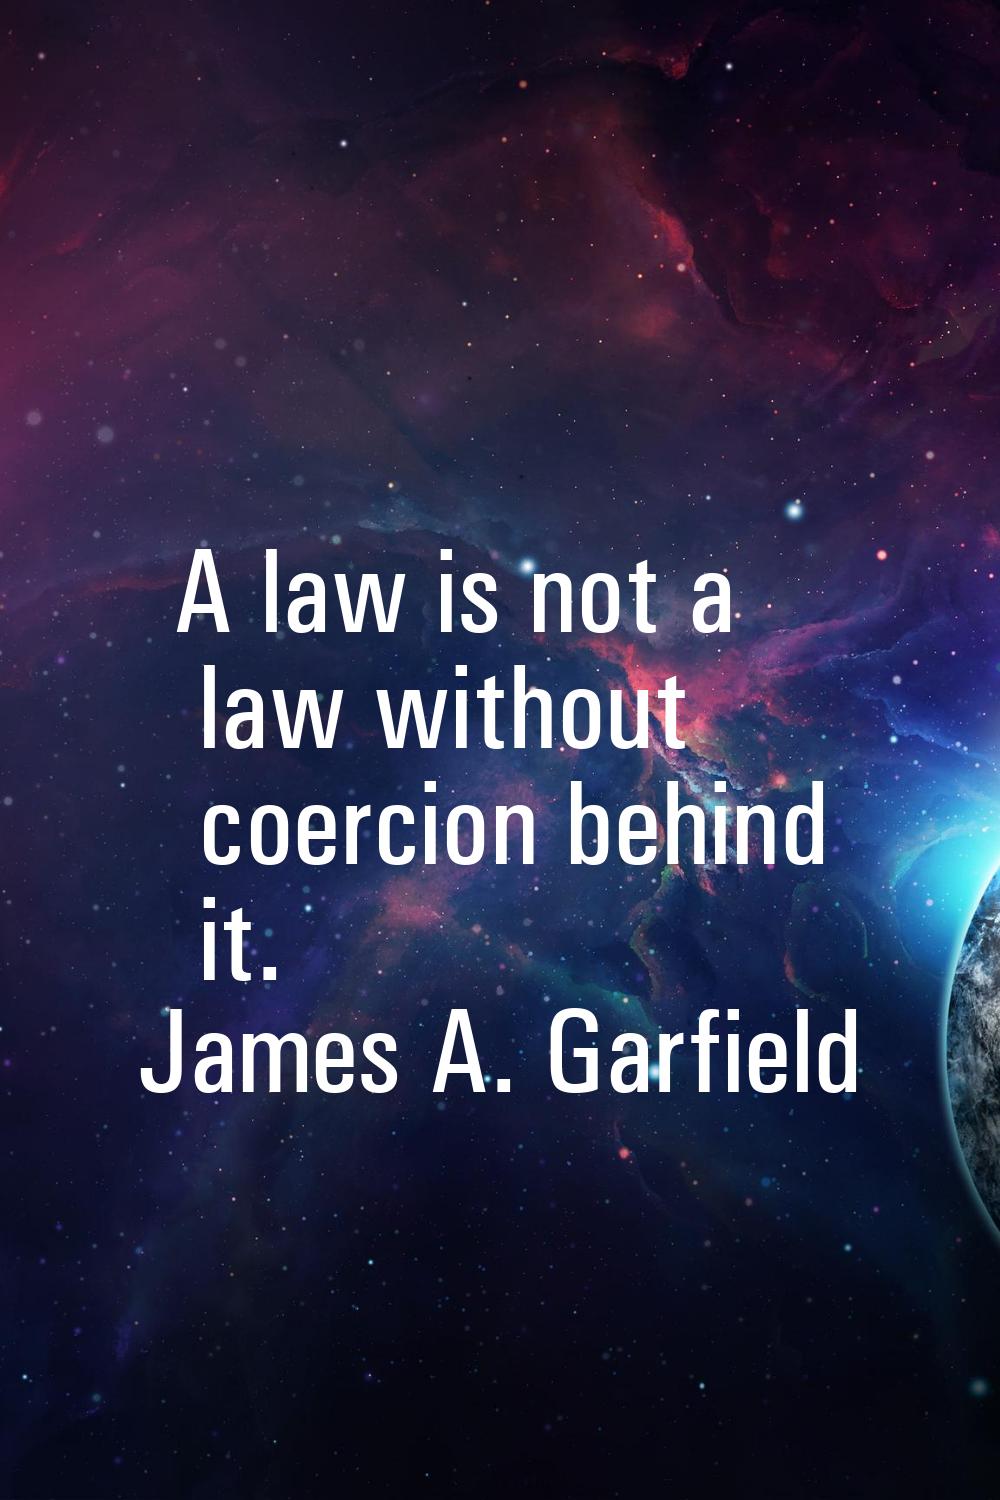 A law is not a law without coercion behind it.